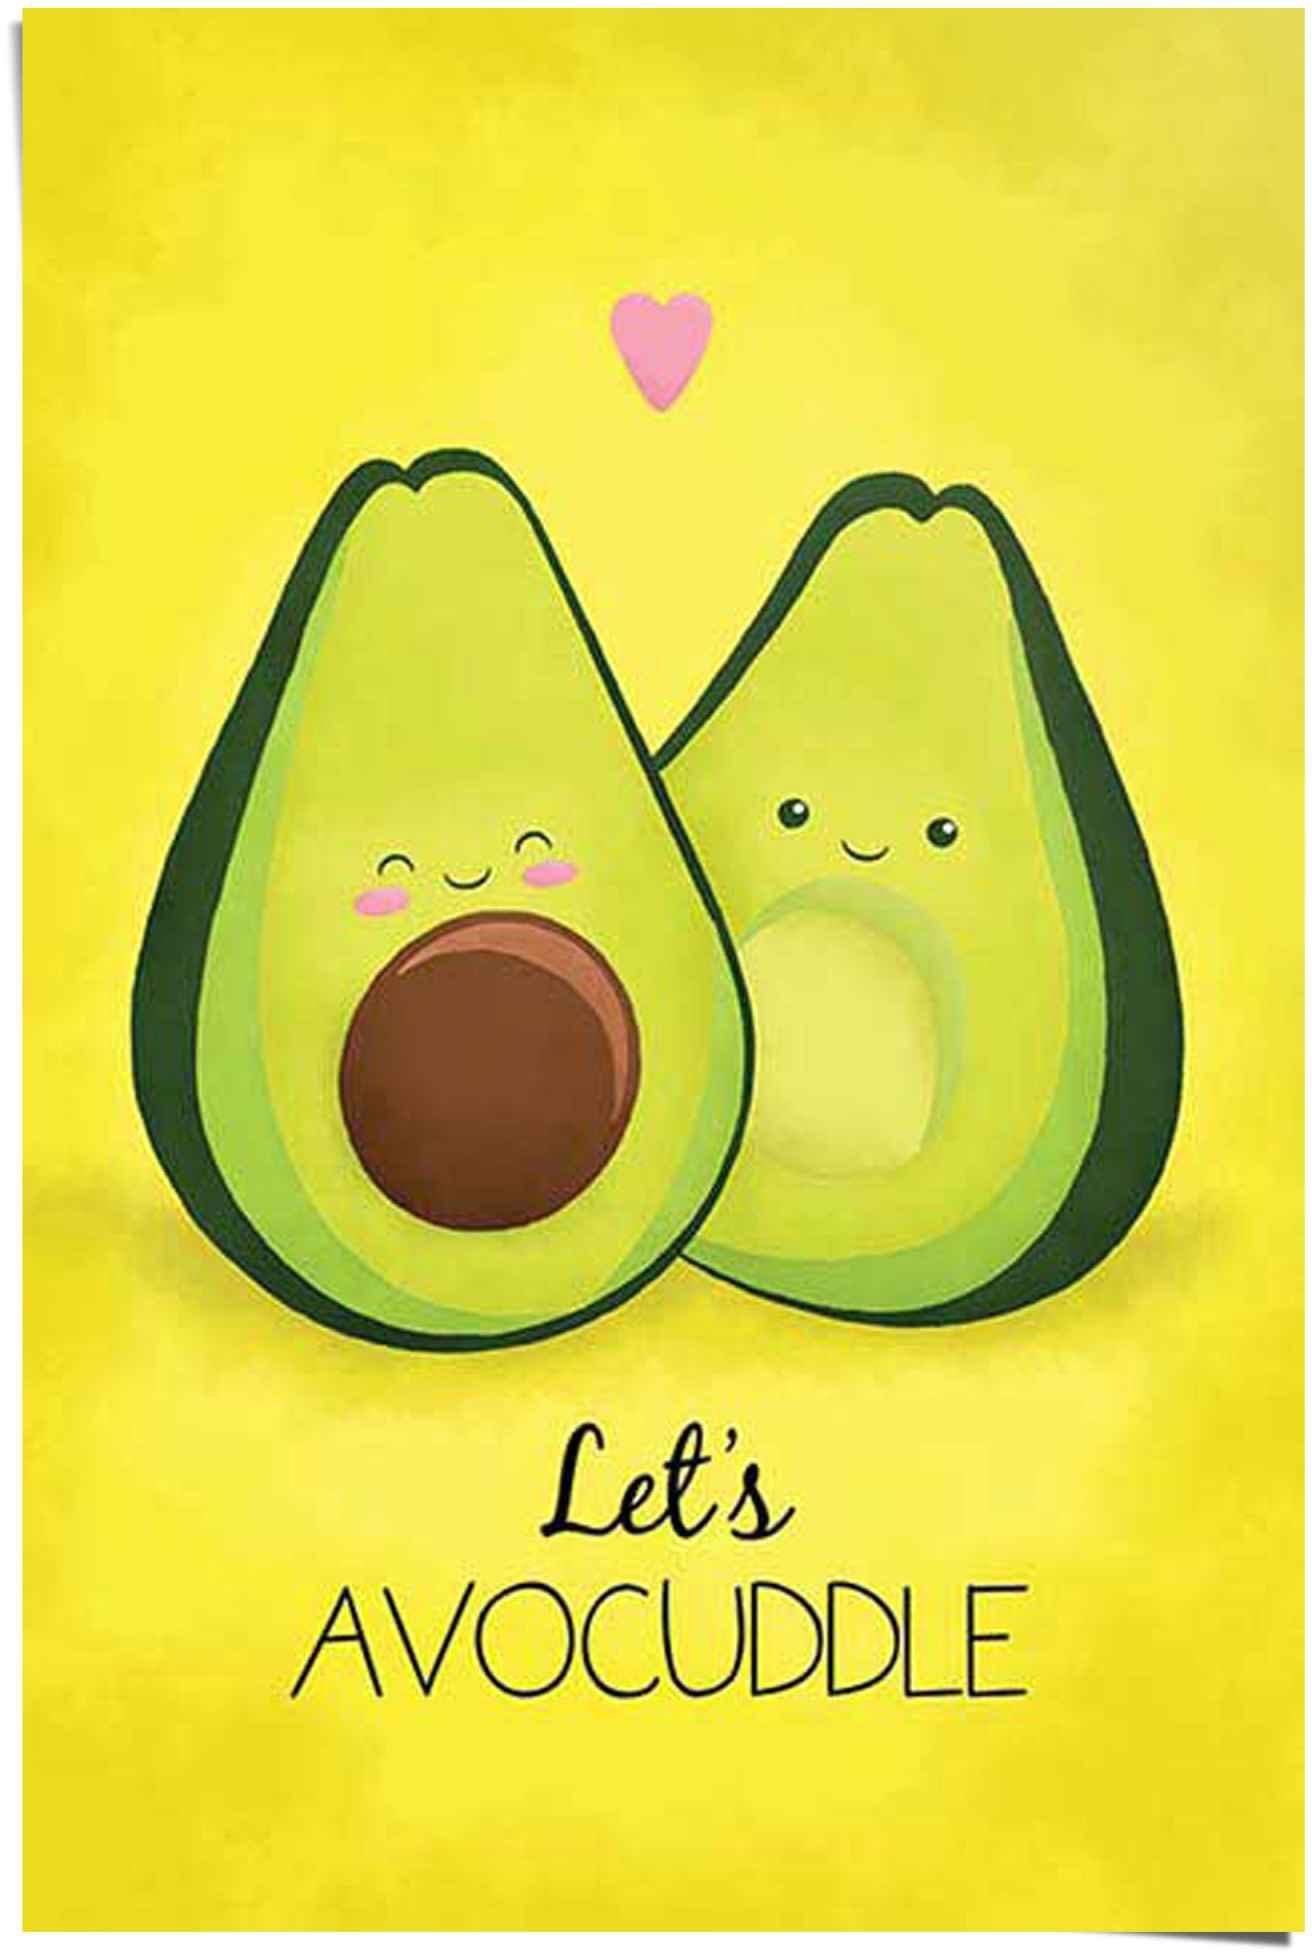 Avocado Reinders! St) Poster avocuddle, (1 let´s